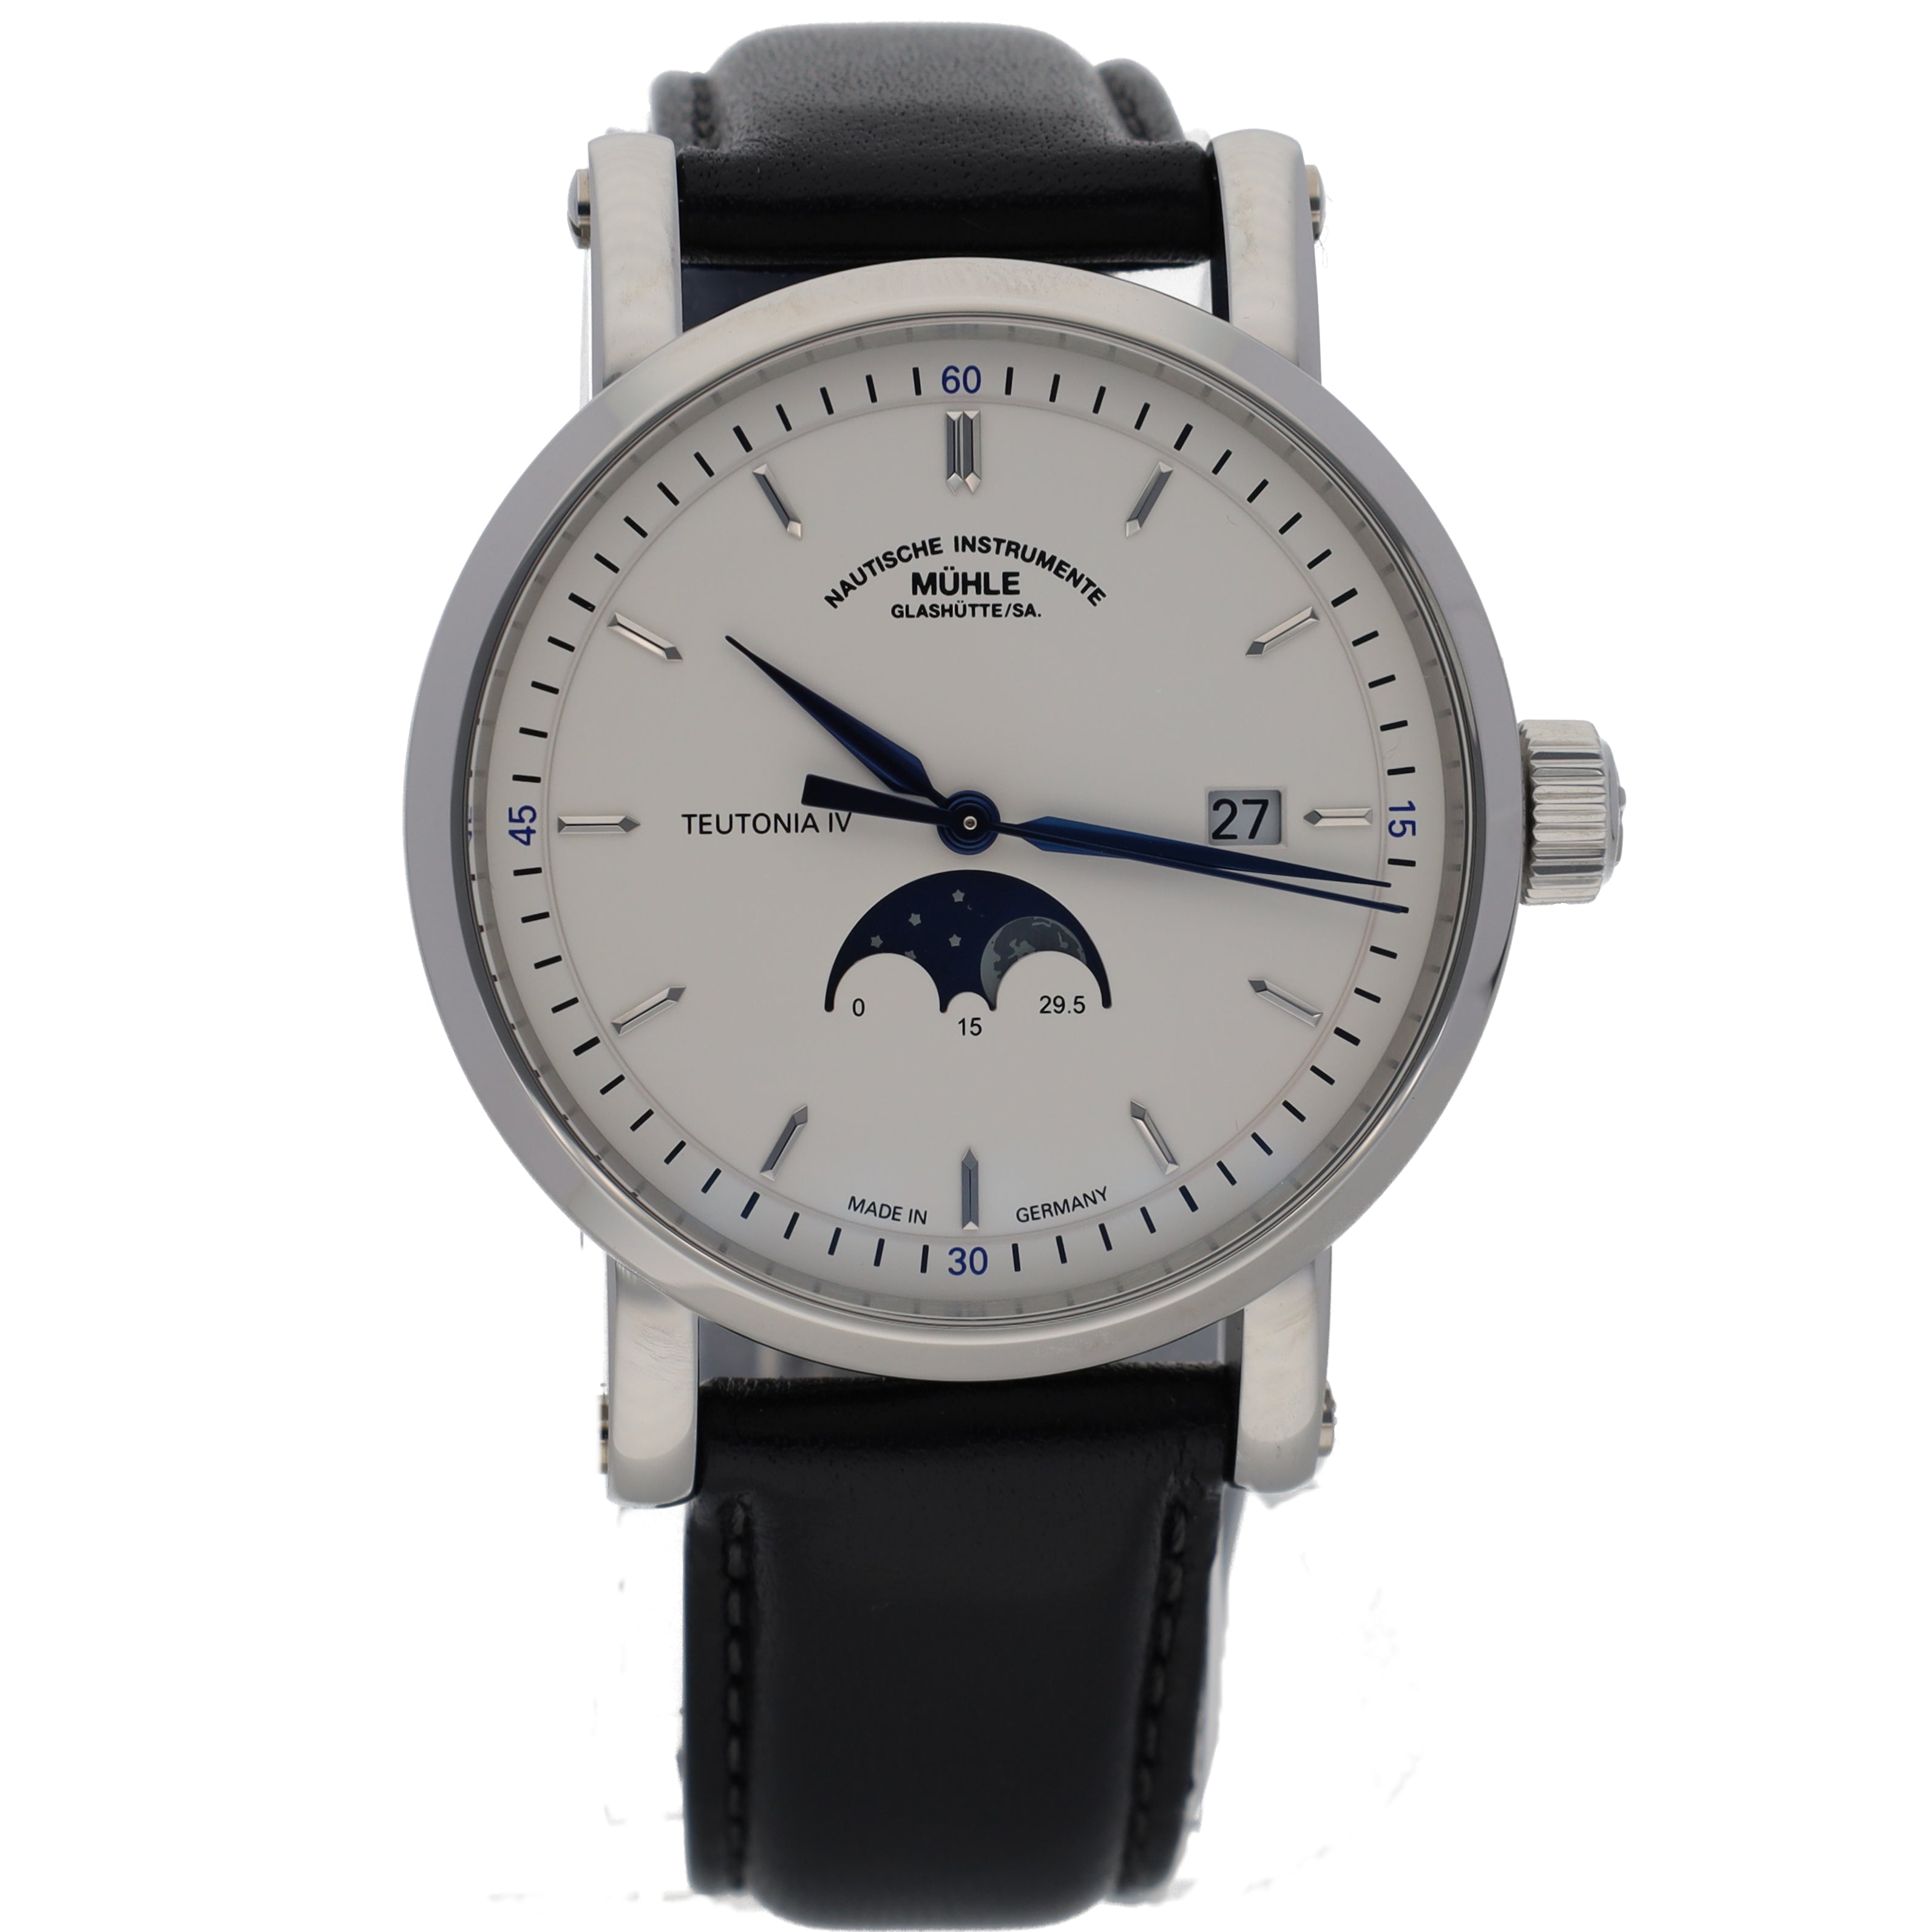 Mühle-Glashütte Teutonia IV Moon Phase Automatic M1-44-05-LB Stainless Watch